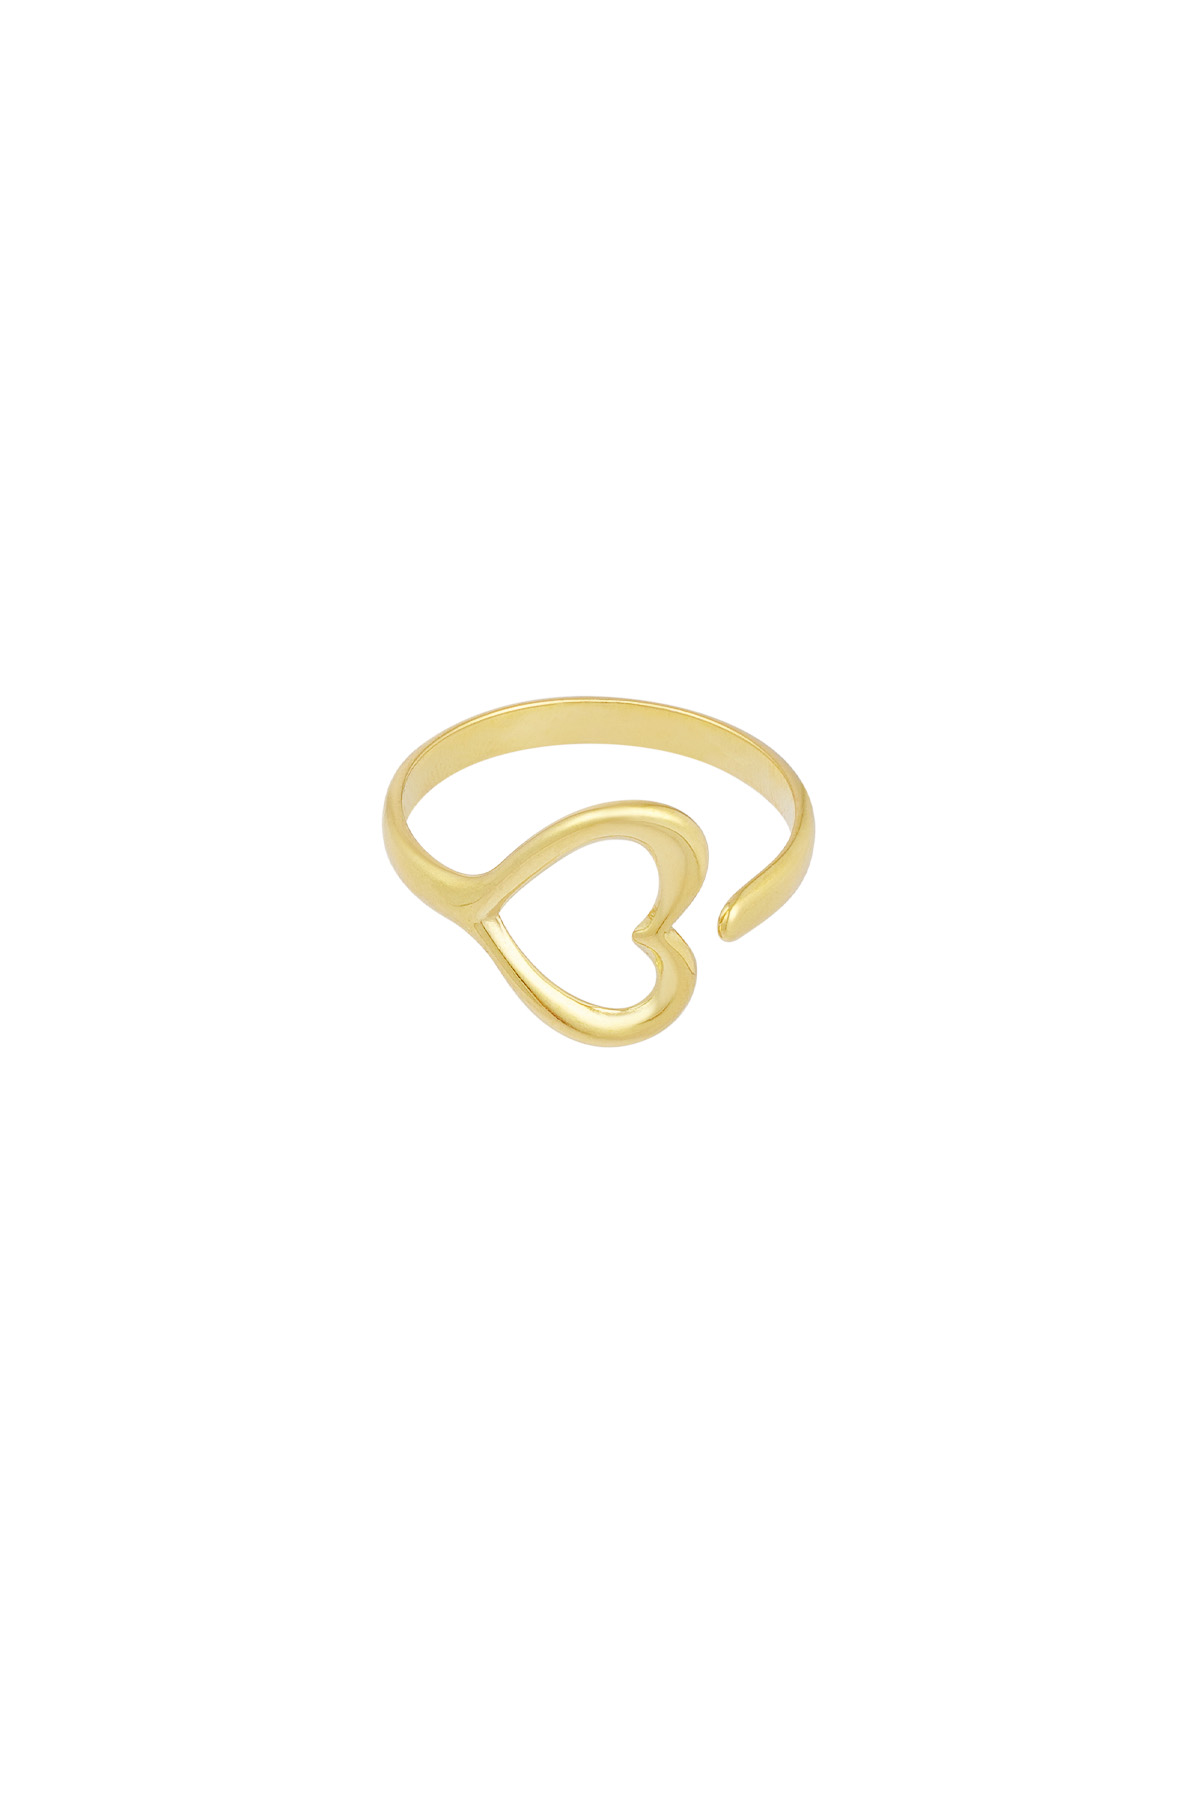 Ring love upside down - gold h5 